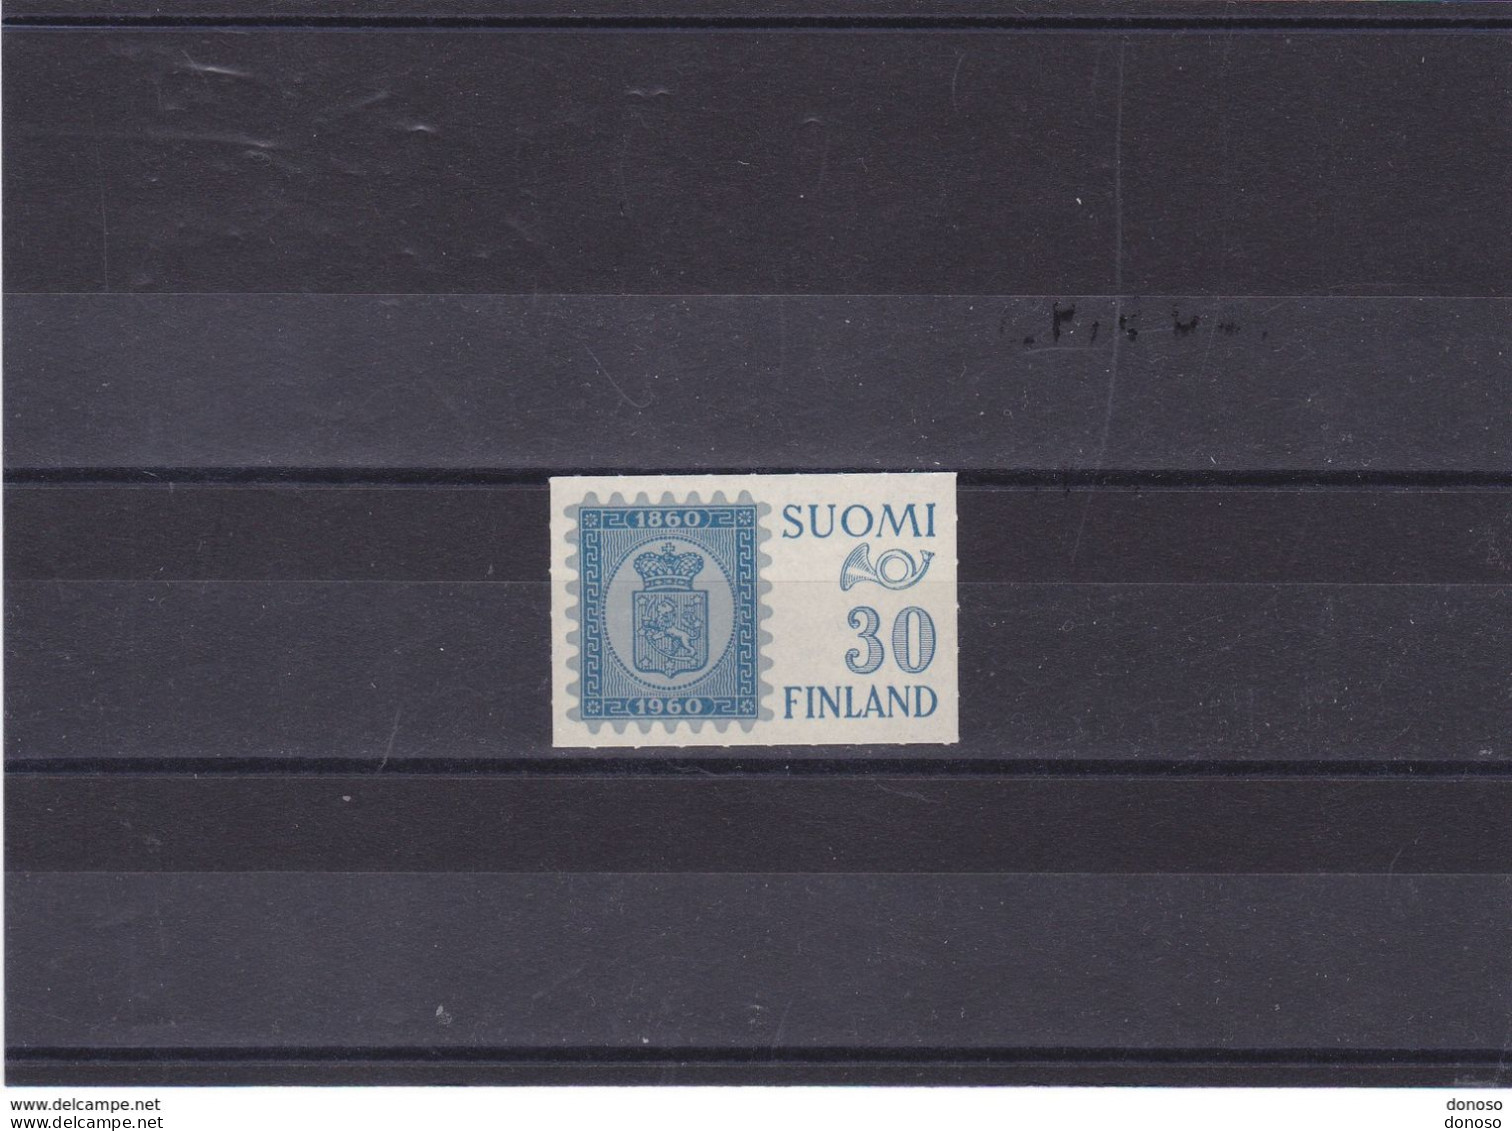 FINLANDE 1960  TIMBRE SUR TIMBRE Yvert 492, Michel 516 NEUF** MNH Cote 8 Euros - Unused Stamps